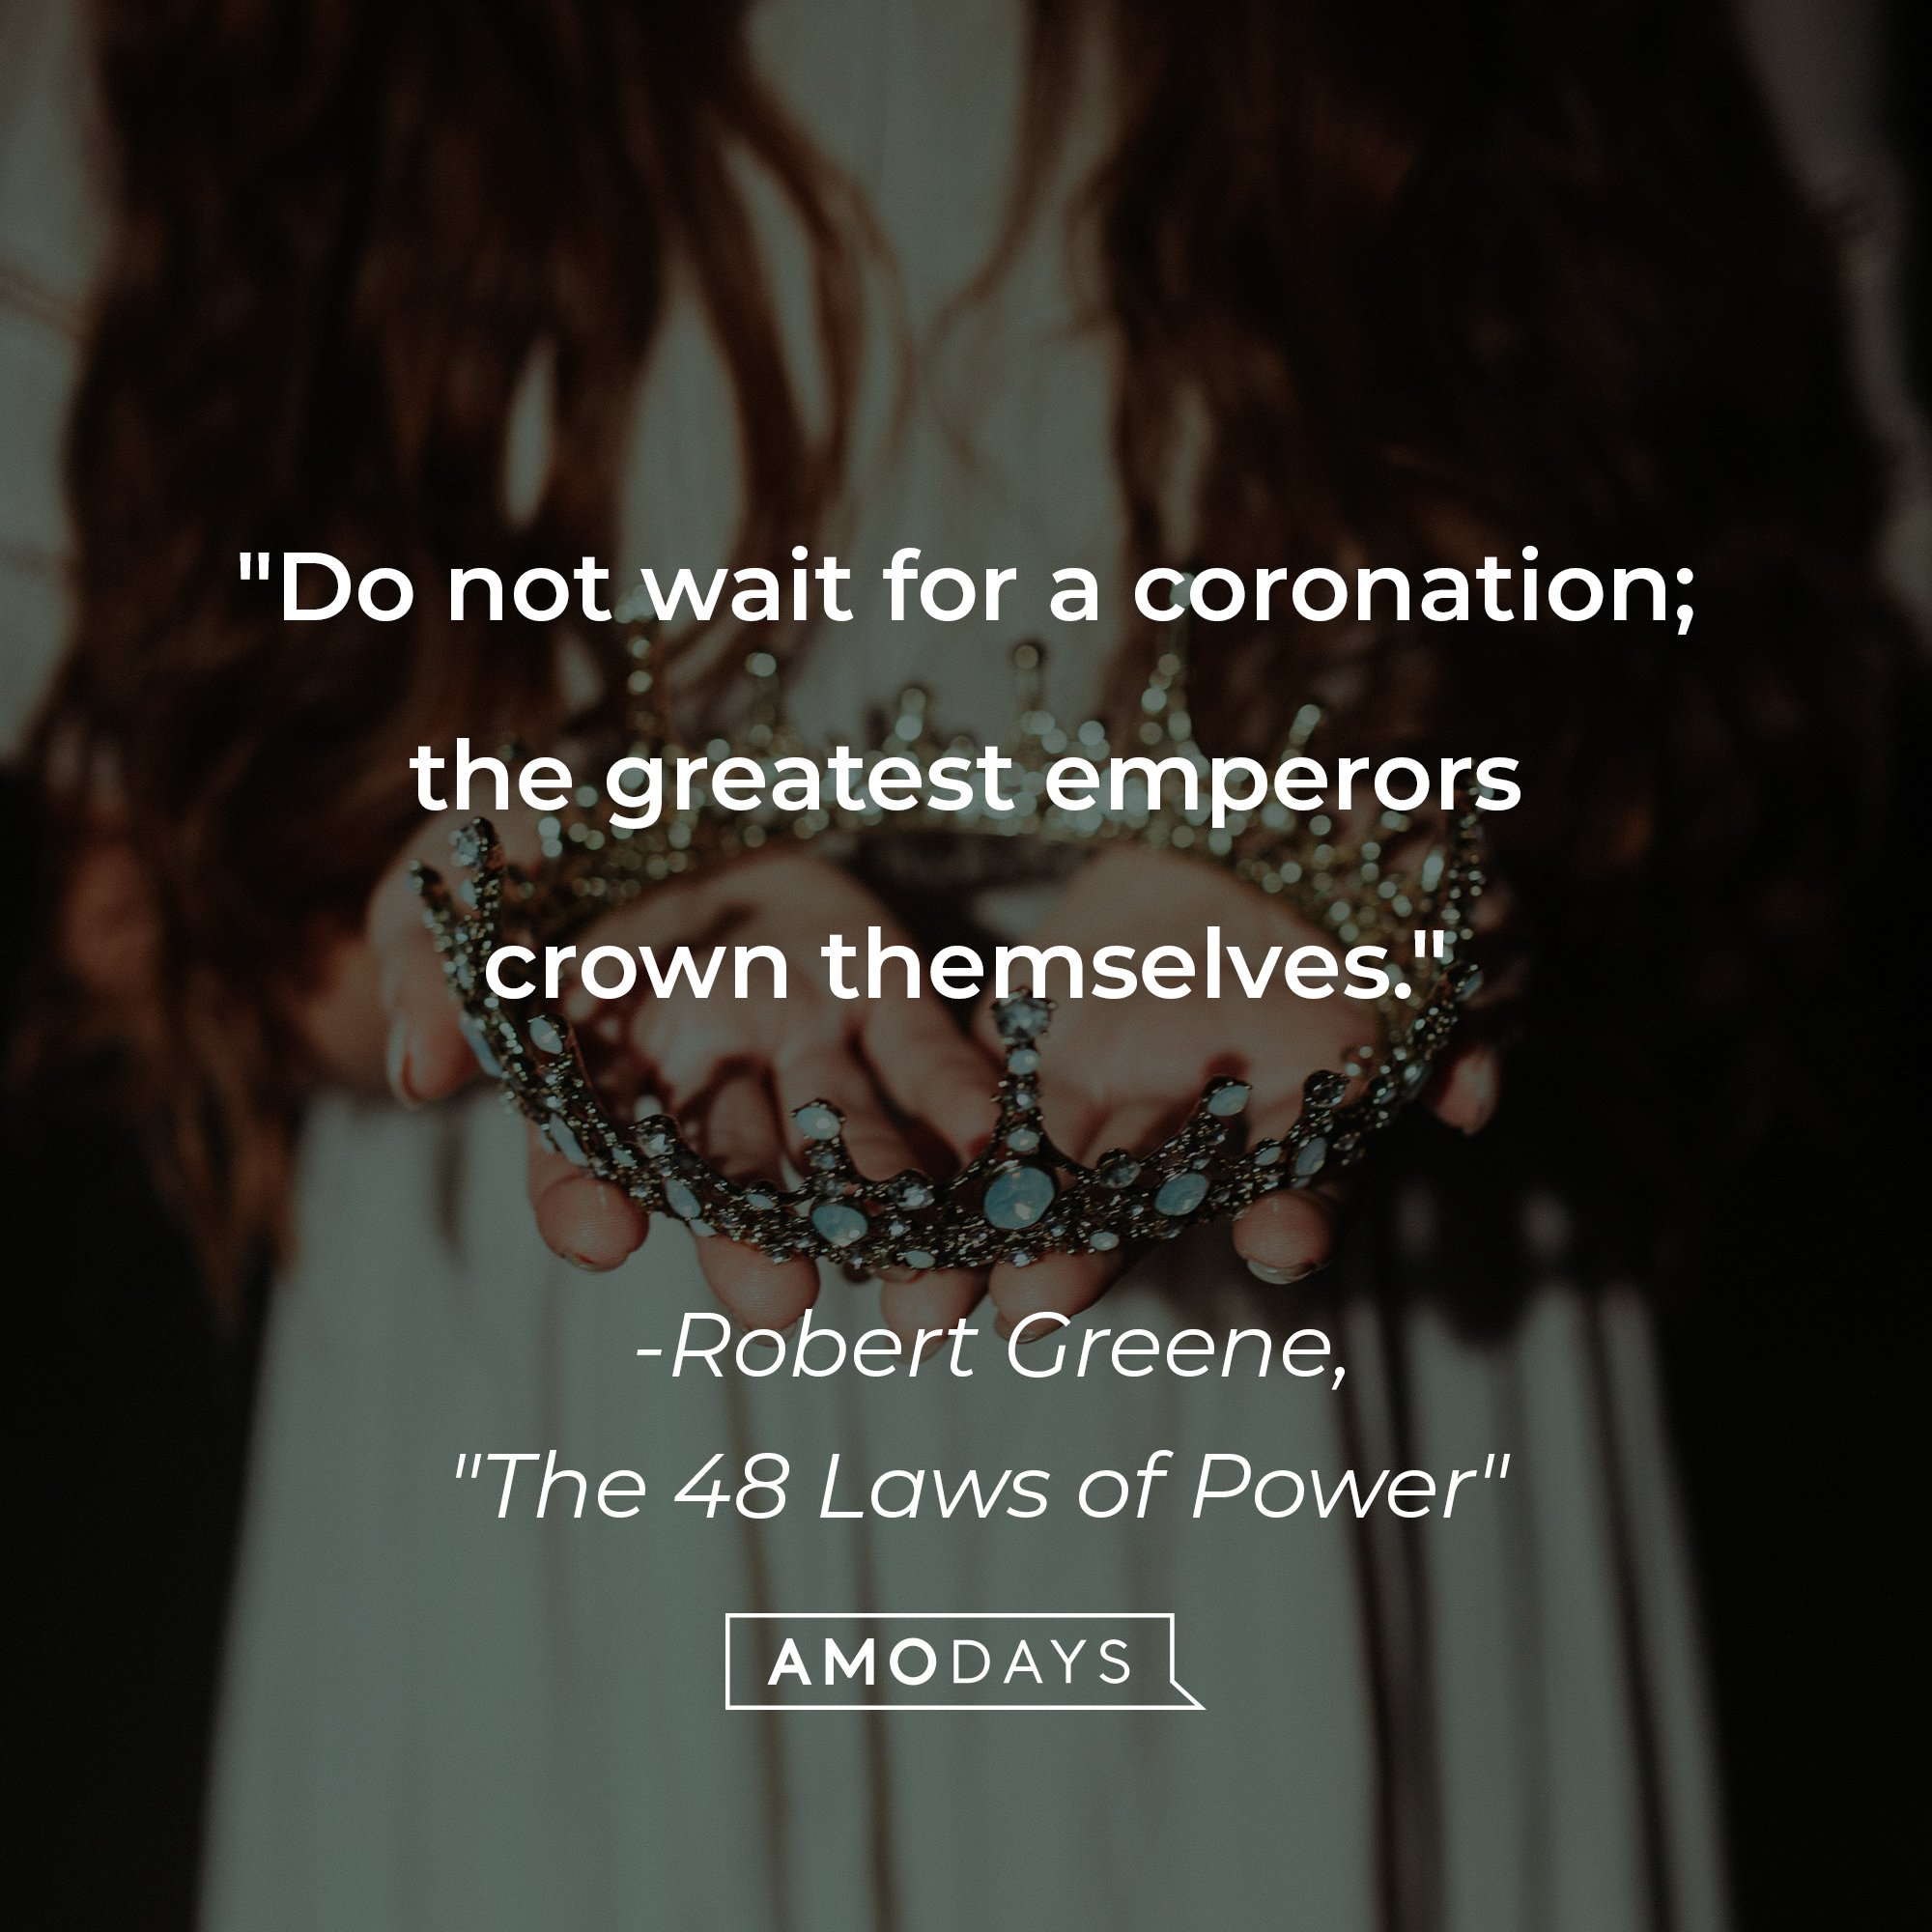 Robert Greene's "The 48 Laws of Power" quote: "Do not wait for a coronation; the greatest emperors crown themselves." | Image: AmoDays